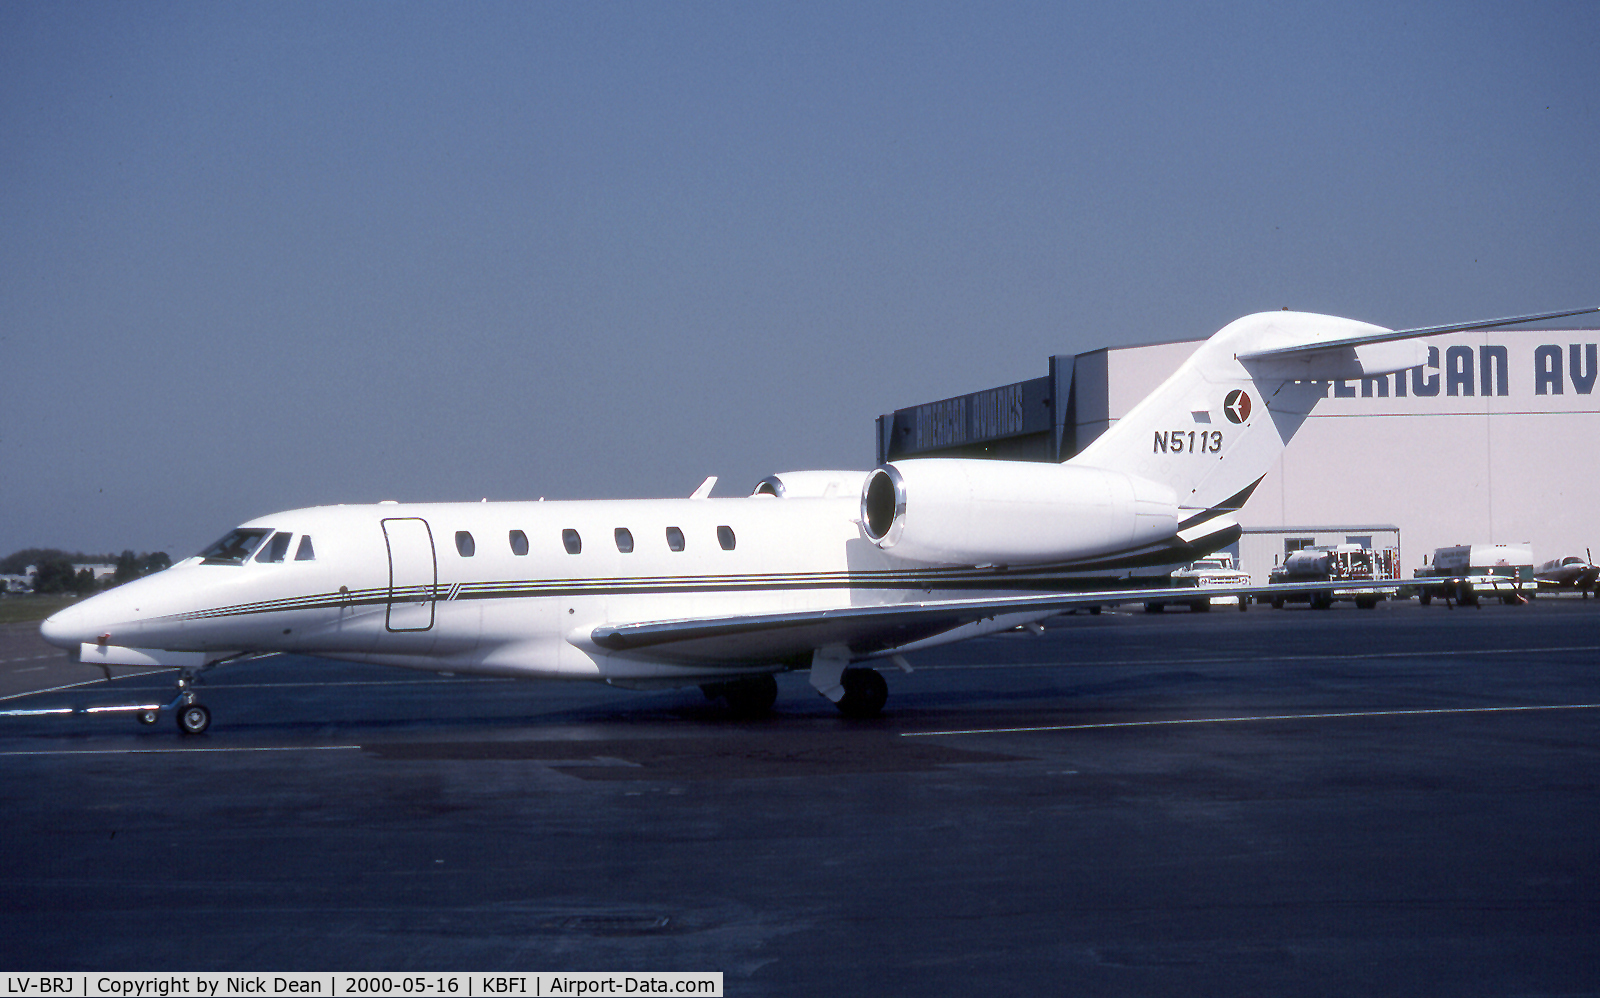 LV-BRJ, 1996 Cessna 750 Citation X Citation X C/N 750-0013, KBFI (5 aircraft have carried N5113 this Slicer was owned at the time by GM but has since been sold to Argentina as LV-BRJ as posted)